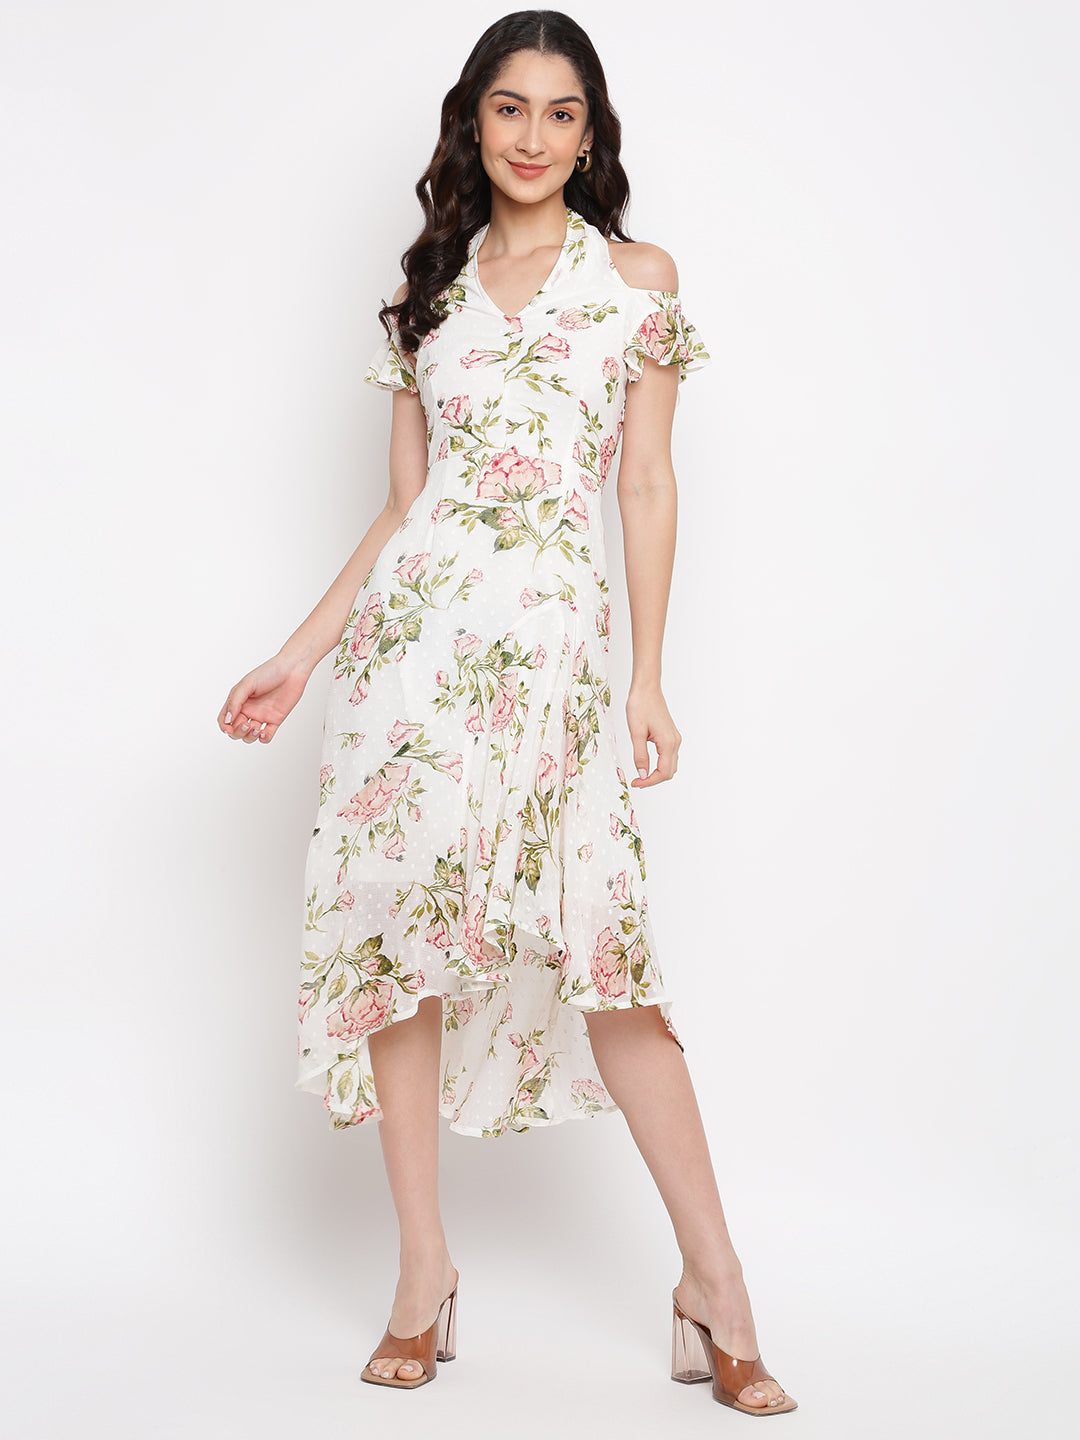 Ivory Floral Printed V-Neck With Cap Sleeves Asymmetric Dress